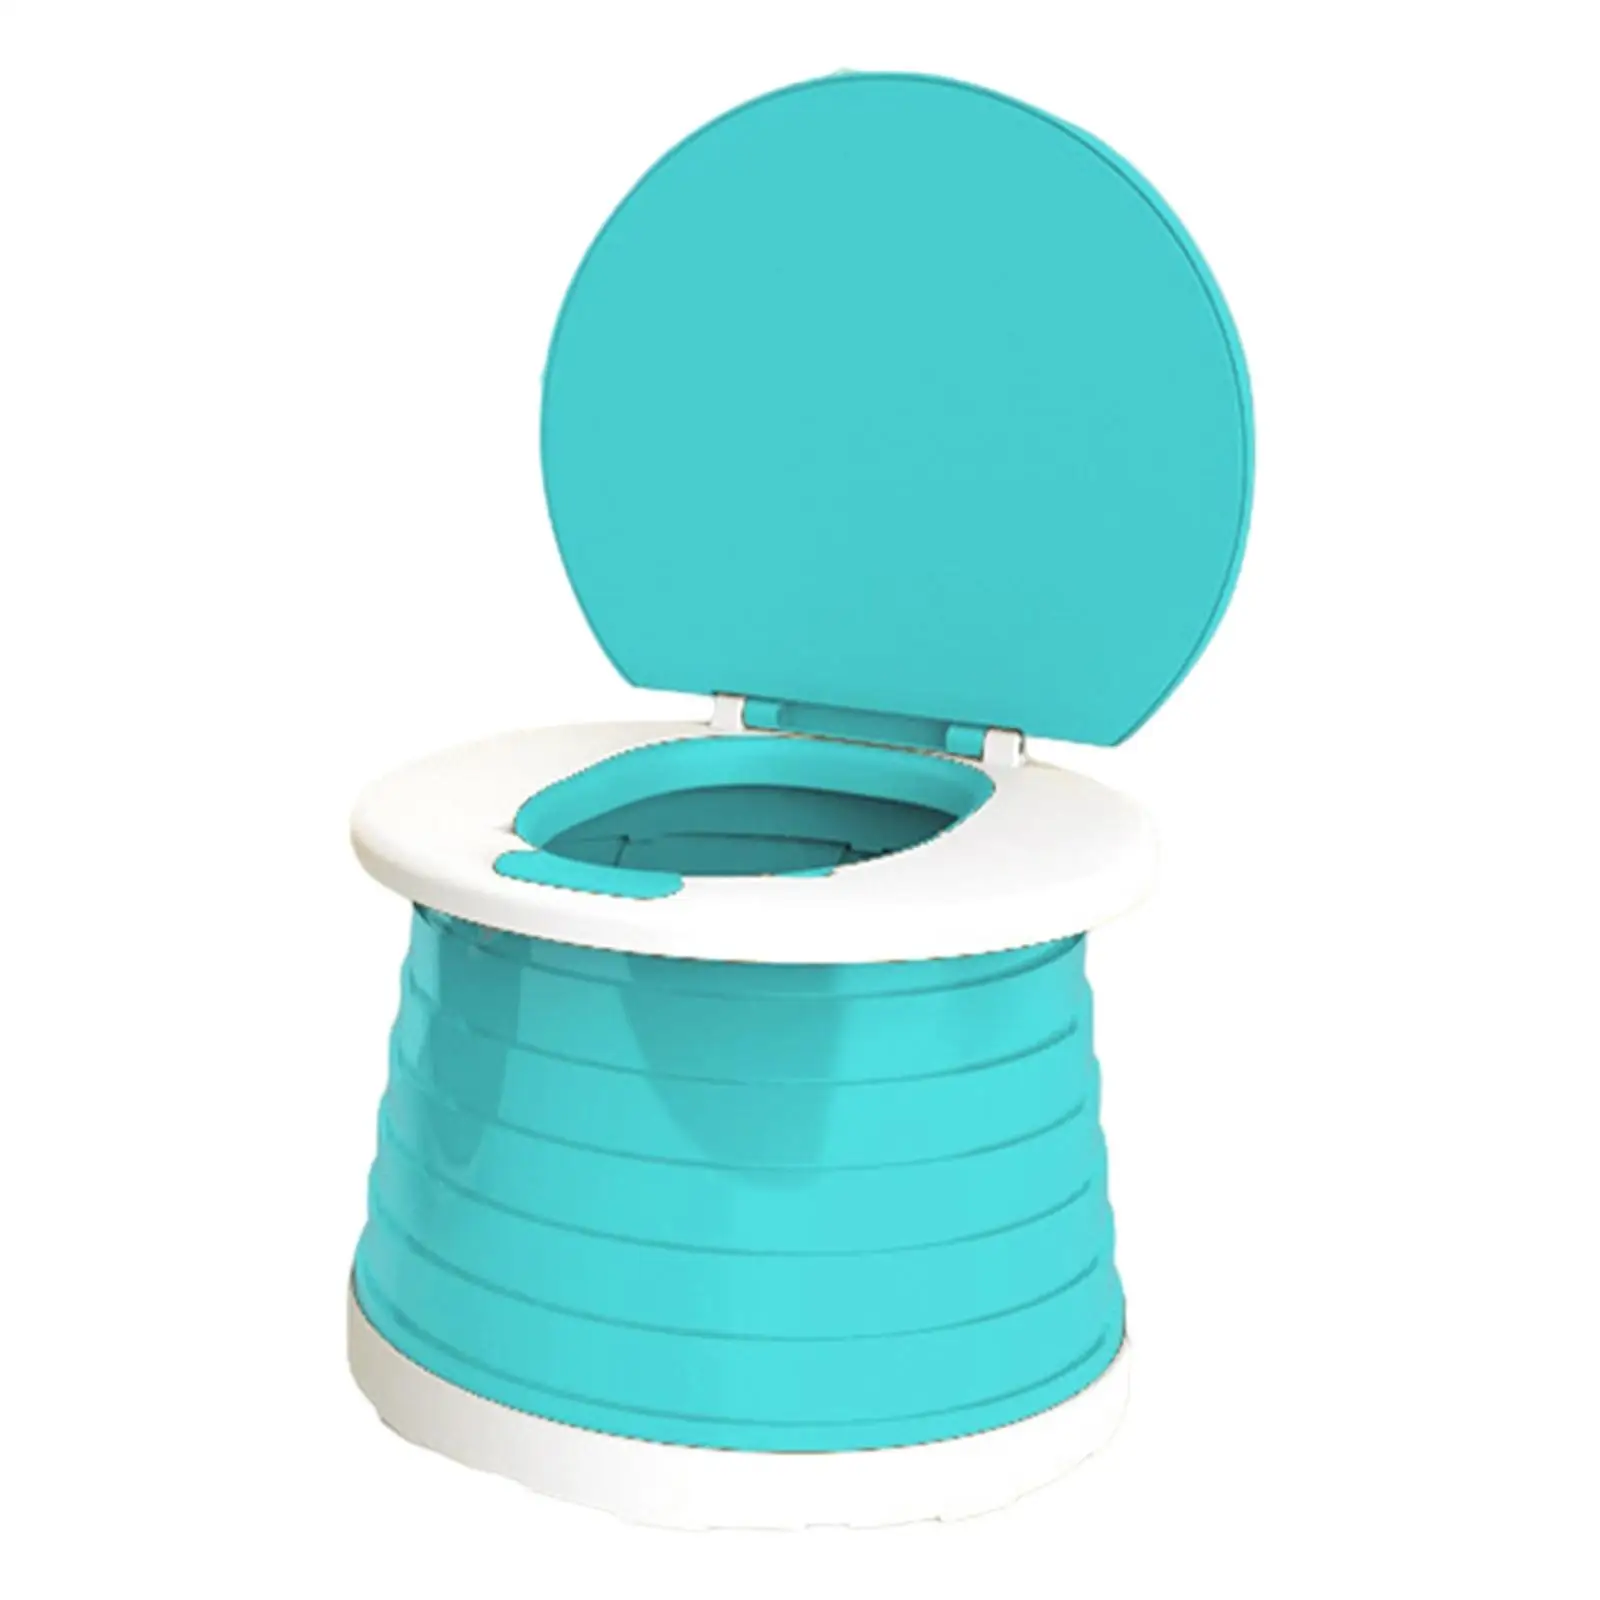 Portable Children Collapsible Toilet seat for kids Potty for Camping Travel